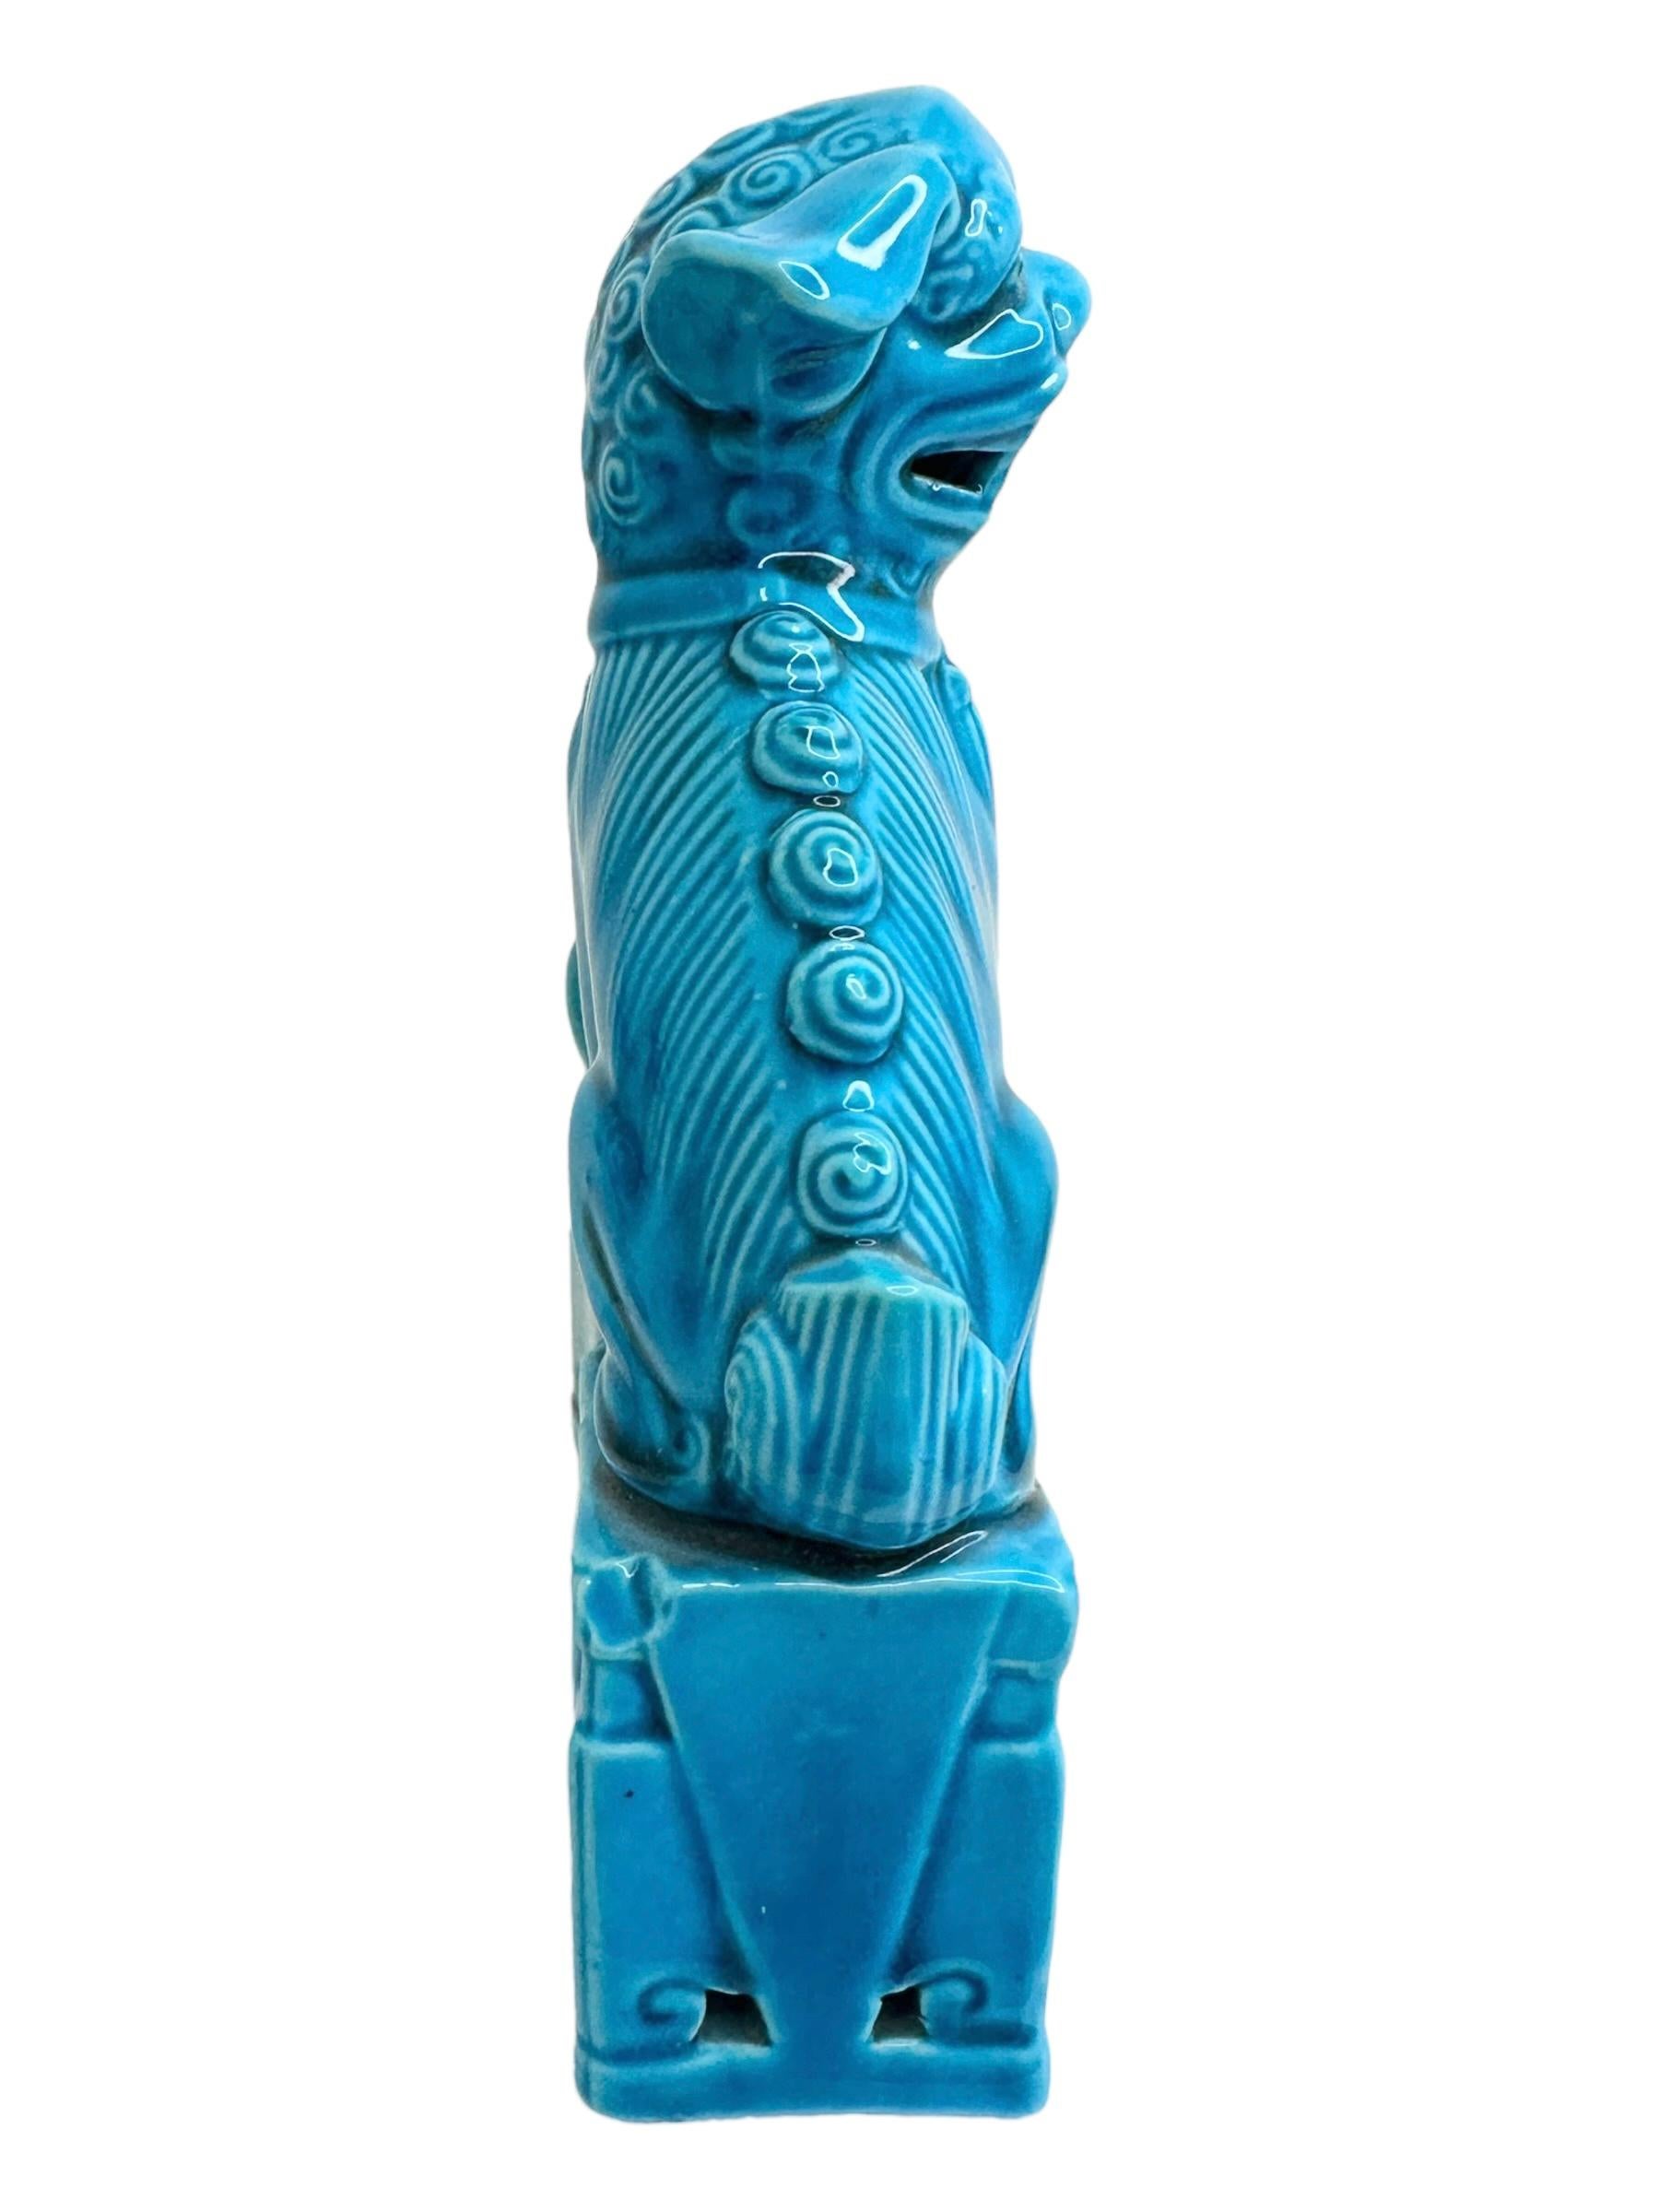 Hollywood Regency Pair of Decorative Turquoise Blue Foo Dogs Sculptures, Ceramic Statue For Sale